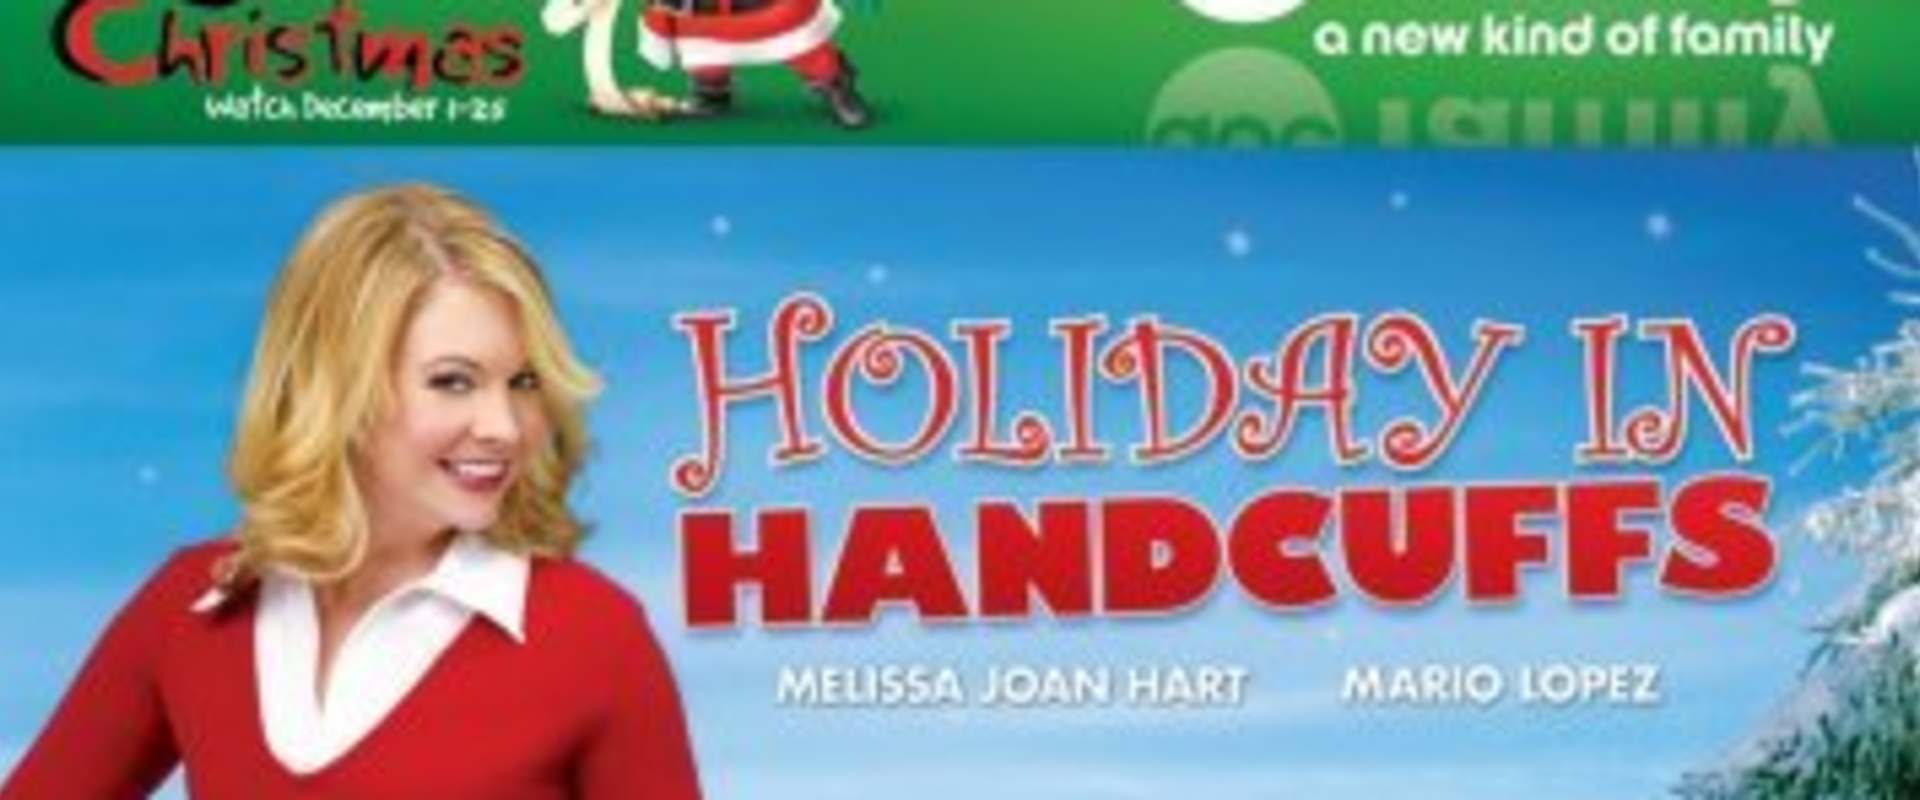 Holiday in Handcuffs background 2